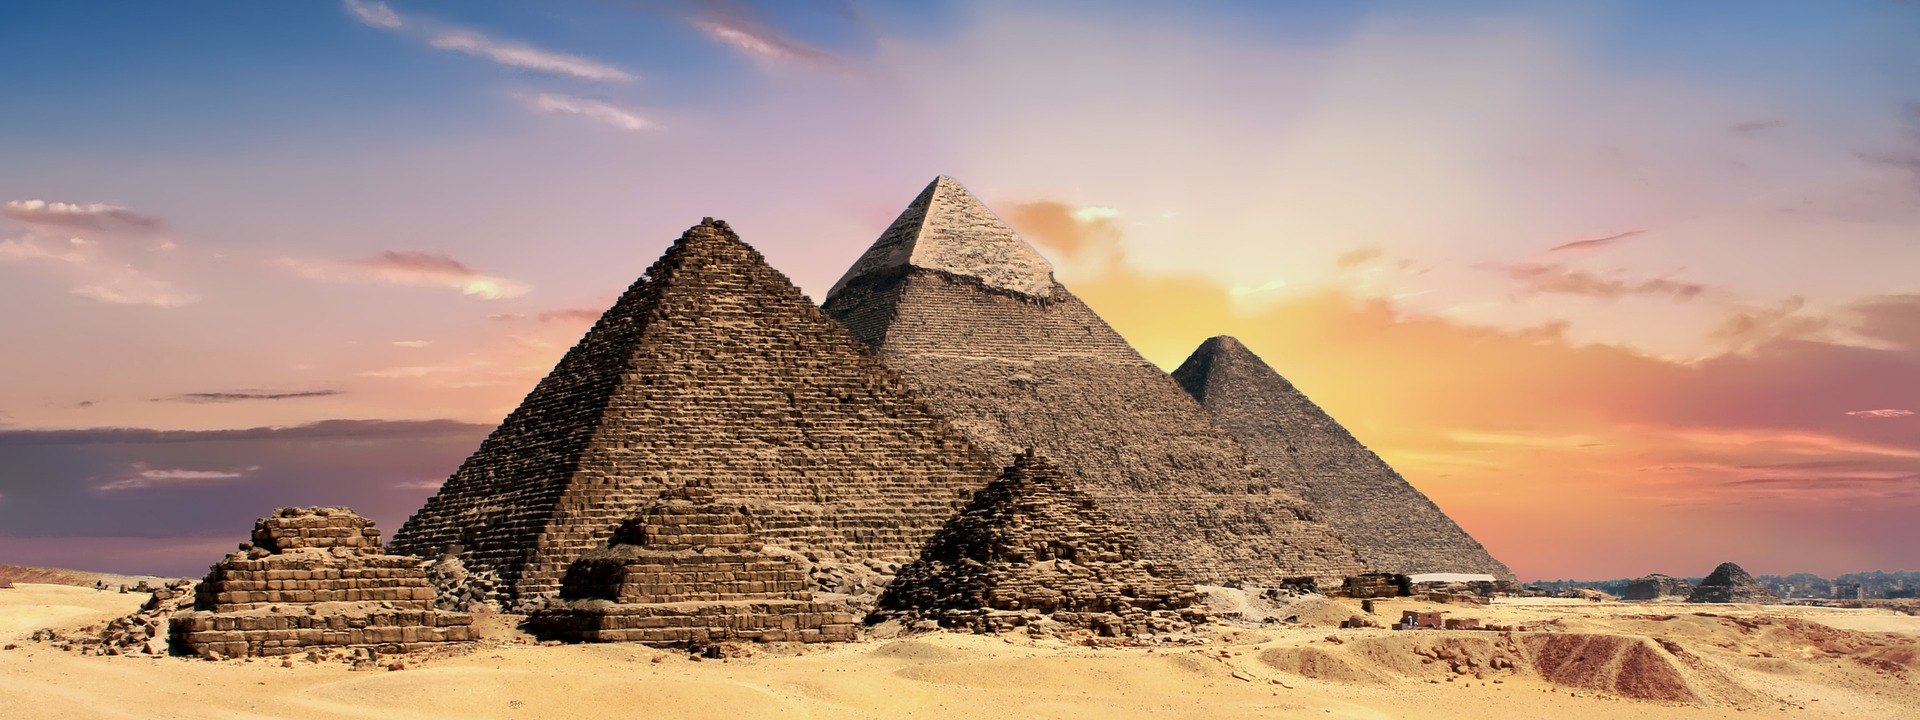 Ancient Egyptian Pyramids of Giza with covering the Sun making Sky look orange